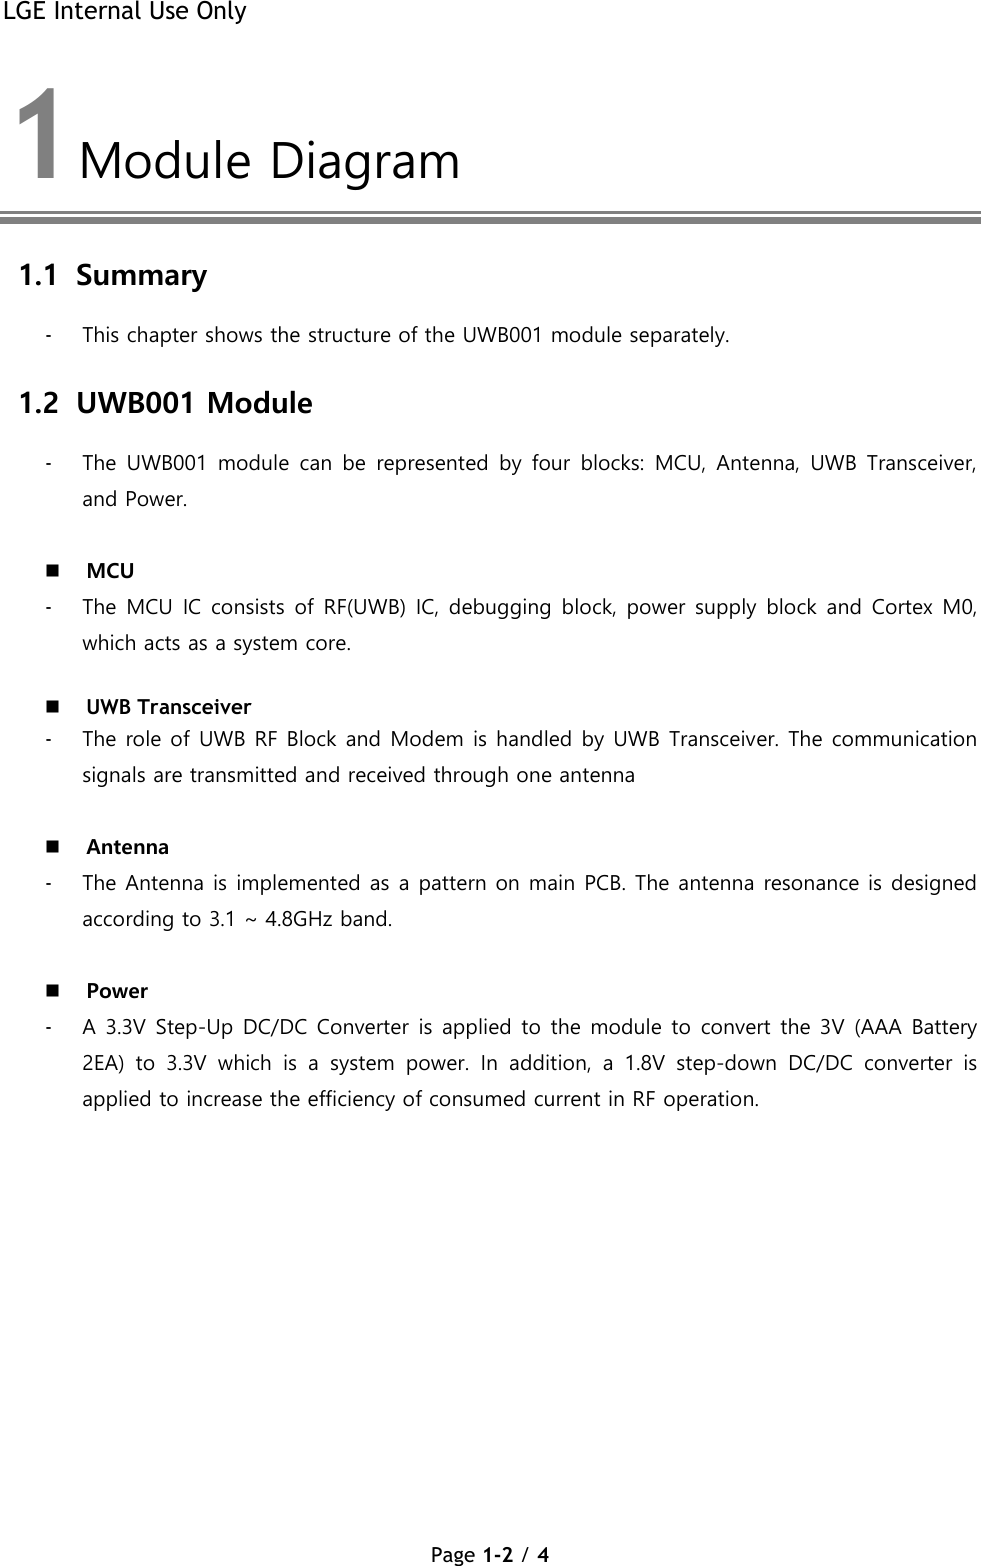 LGE Internal Use Only Page 1-2 / 4  1 Module Diagram  1.1 Summary - This chapter shows the structure of the UWB001 module separately. 1.2 UWB001 Module - The  UWB001  module  can  be  represented  by  four  blocks:  MCU,  Antenna,  UWB Transceiver, and Power.   MCU  - The MCU IC consists of RF(UWB) IC, debugging block, power supply block and Cortex M0, which acts as a system core.   UWB Transceiver  - The role of UWB RF Block and Modem is handled by UWB Transceiver. The communication signals are transmitted and received through one antenna    Antenna  - The Antenna is implemented as a pattern on main PCB. The antenna resonance is designed according to 3.1 ~ 4.8GHz band.   Power  - A 3.3V Step-Up DC/DC Converter is applied to the module to convert the 3V (AAA Battery 2EA)  to  3.3V  which  is  a  system  power.  In  addition,  a  1.8V  step-down  DC/DC  converter  is applied to increase the efficiency of consumed current in RF operation. 